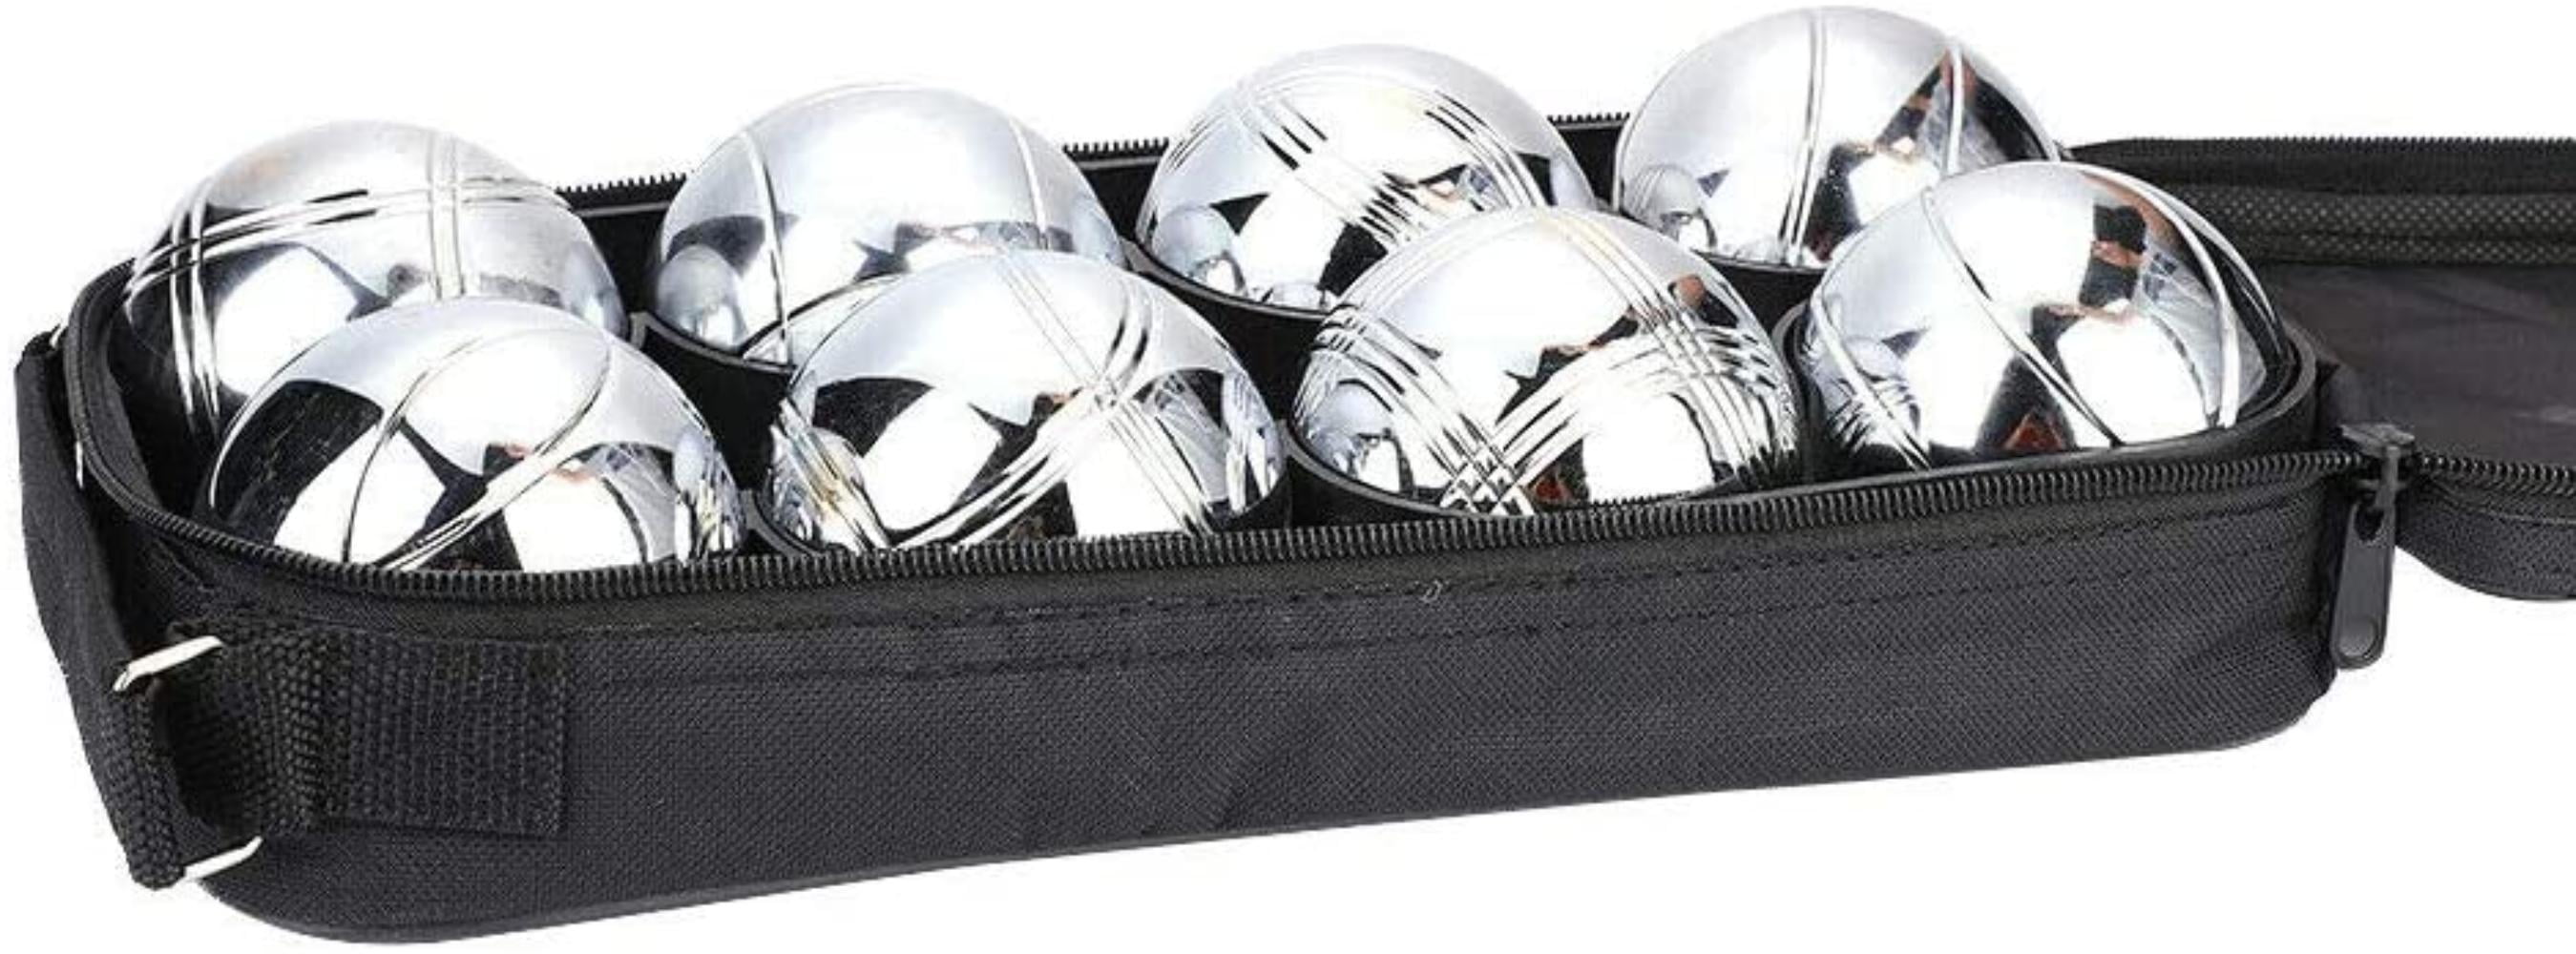 8 FRENCH BALL STAINLESS STEEL BOULES SET PETANQUE OUTDOOR CARRY CASE GARDEN GAME 